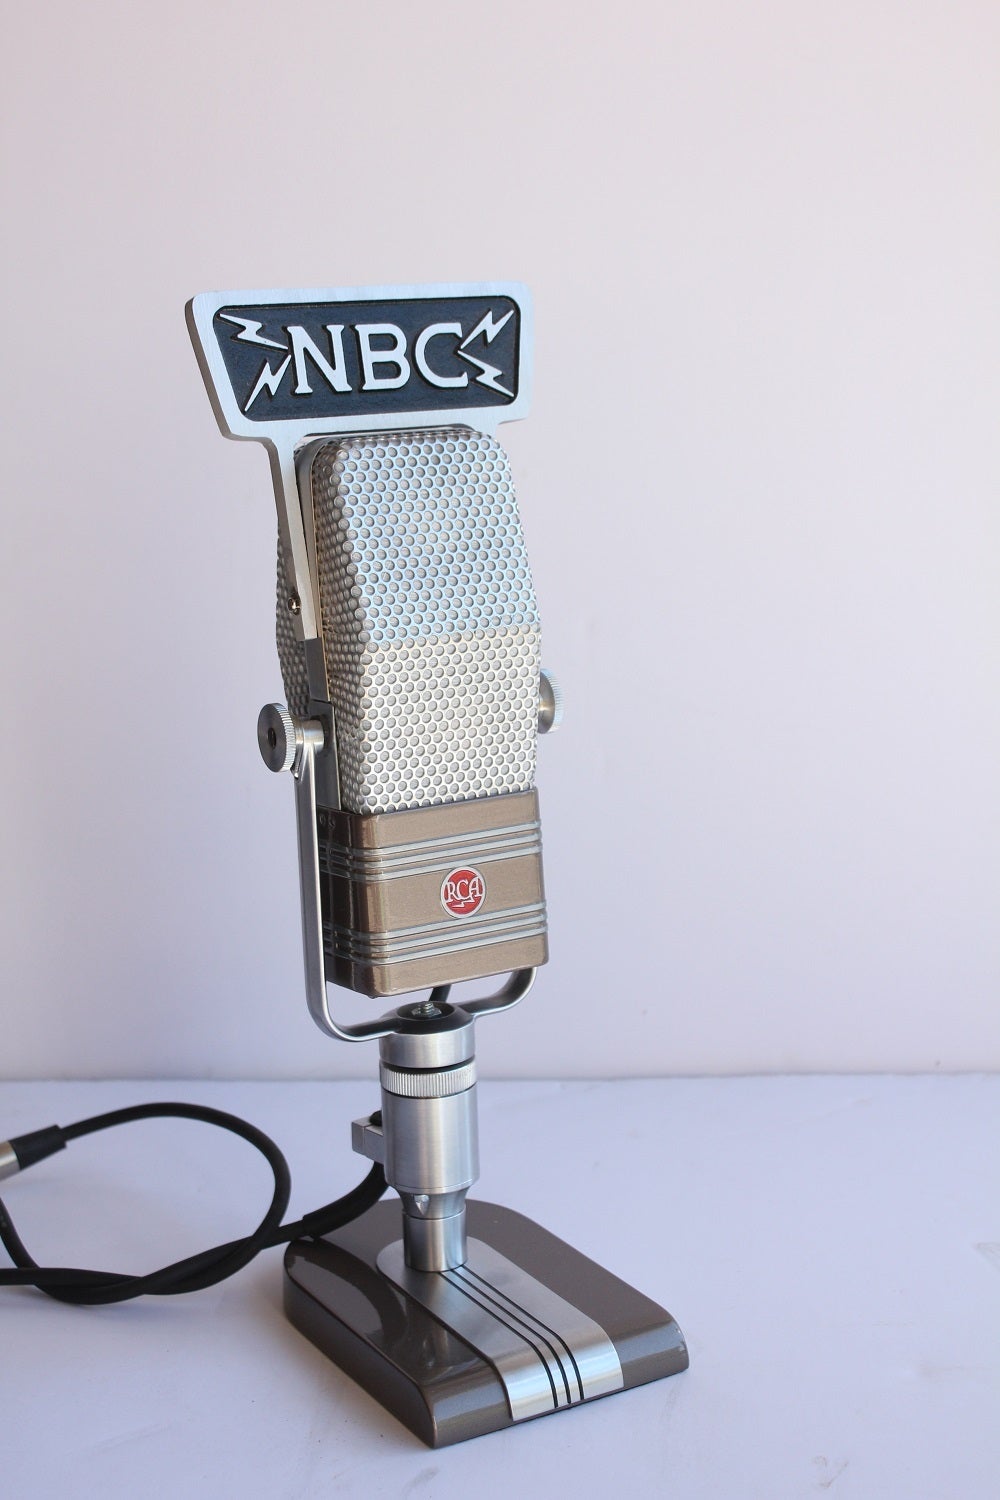 1950s original RCA microphone with new NBC sign and new Art Deco style stand.